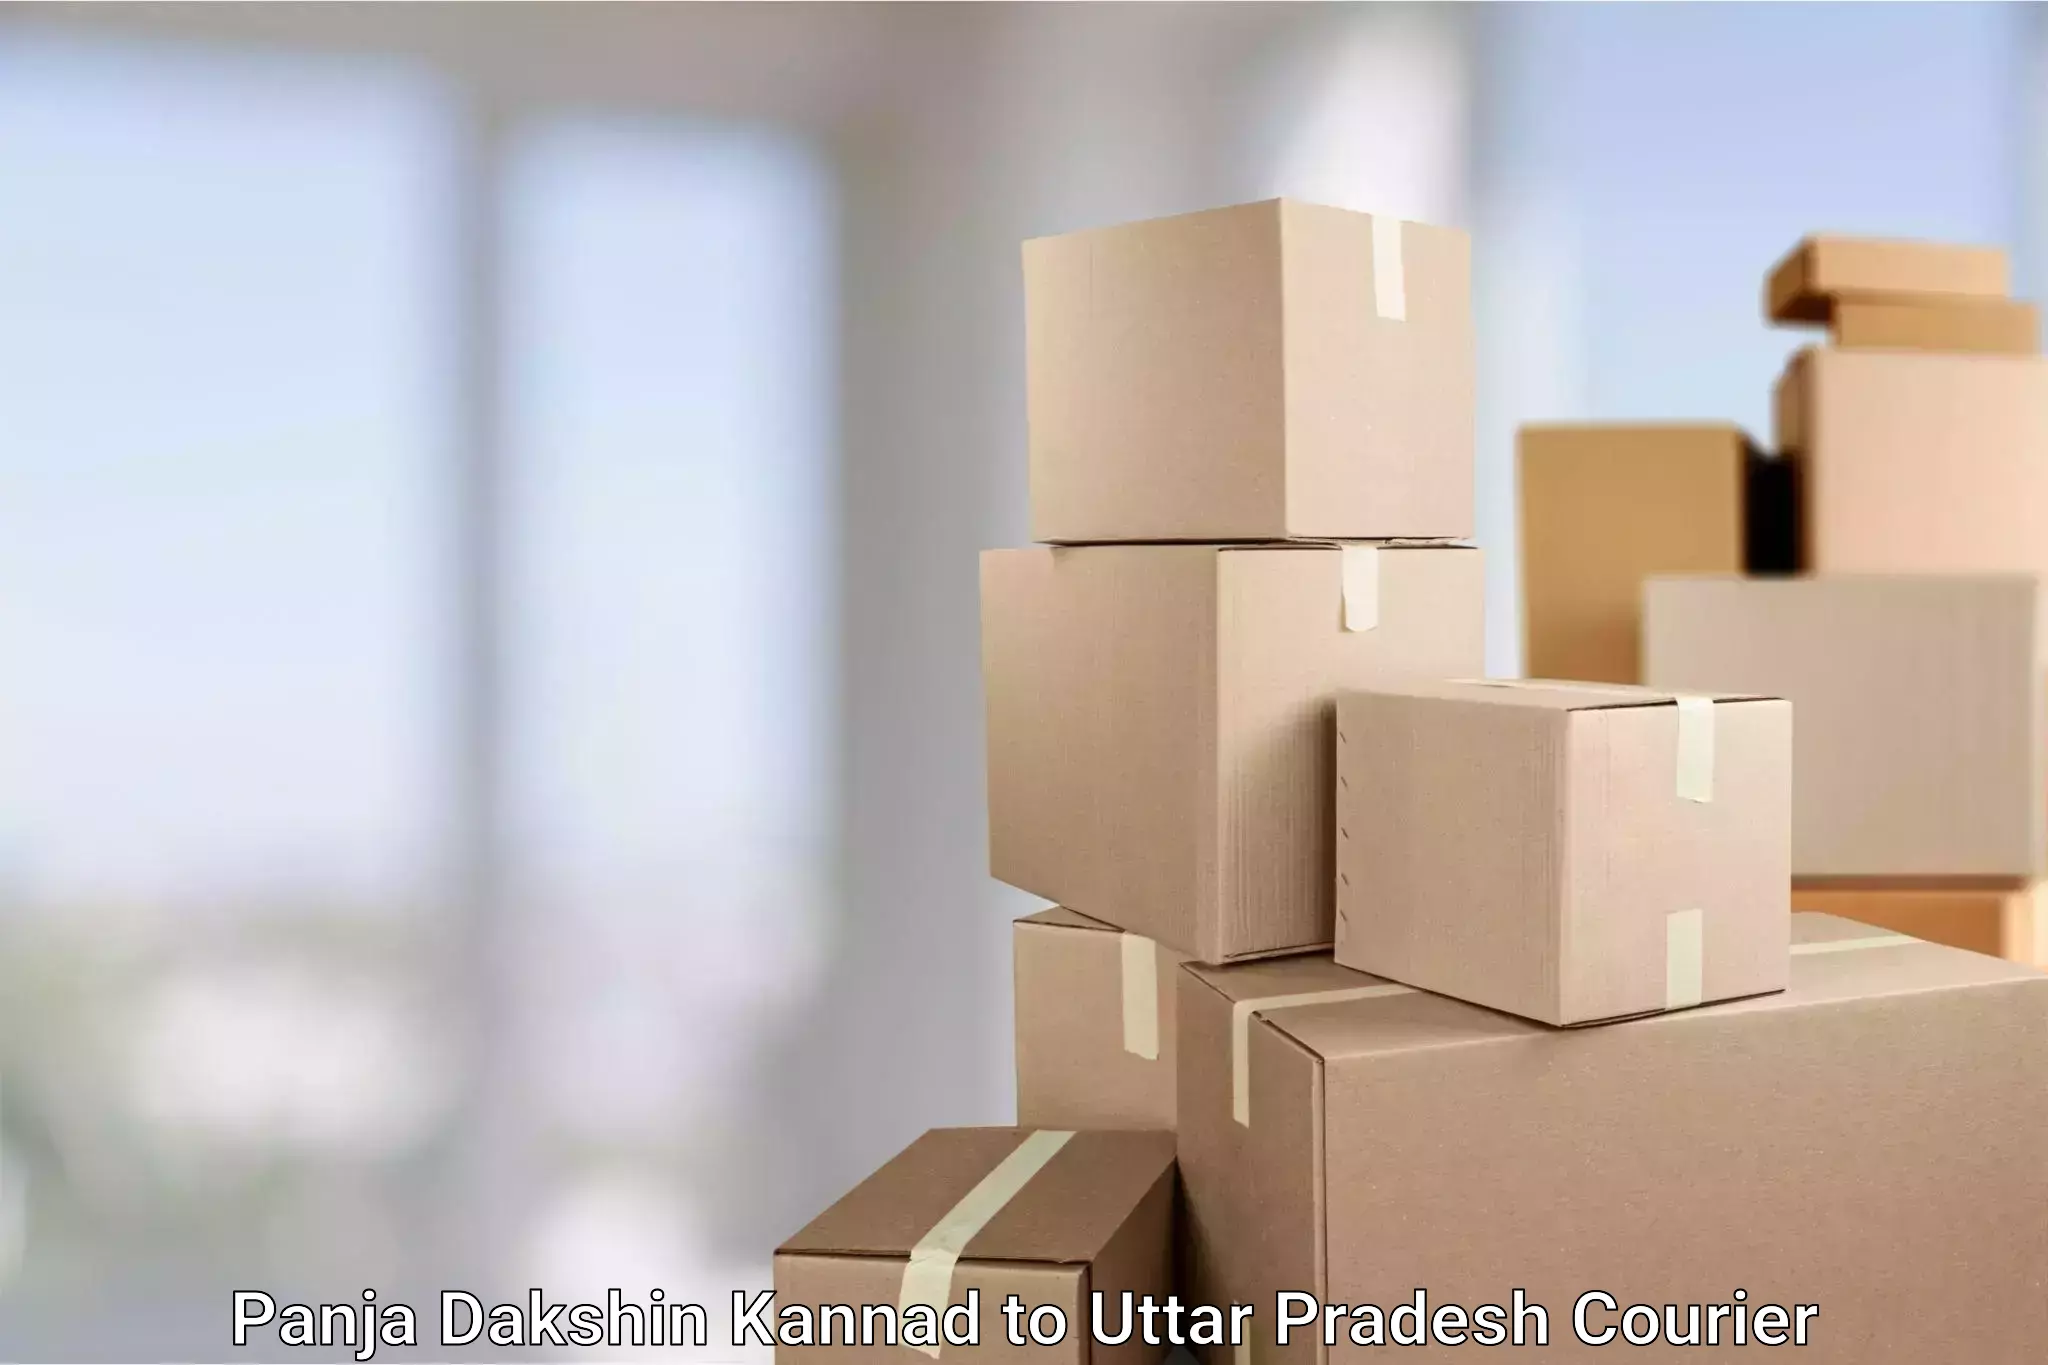 Multi-national courier services in Panja Dakshin Kannad to Kanpur